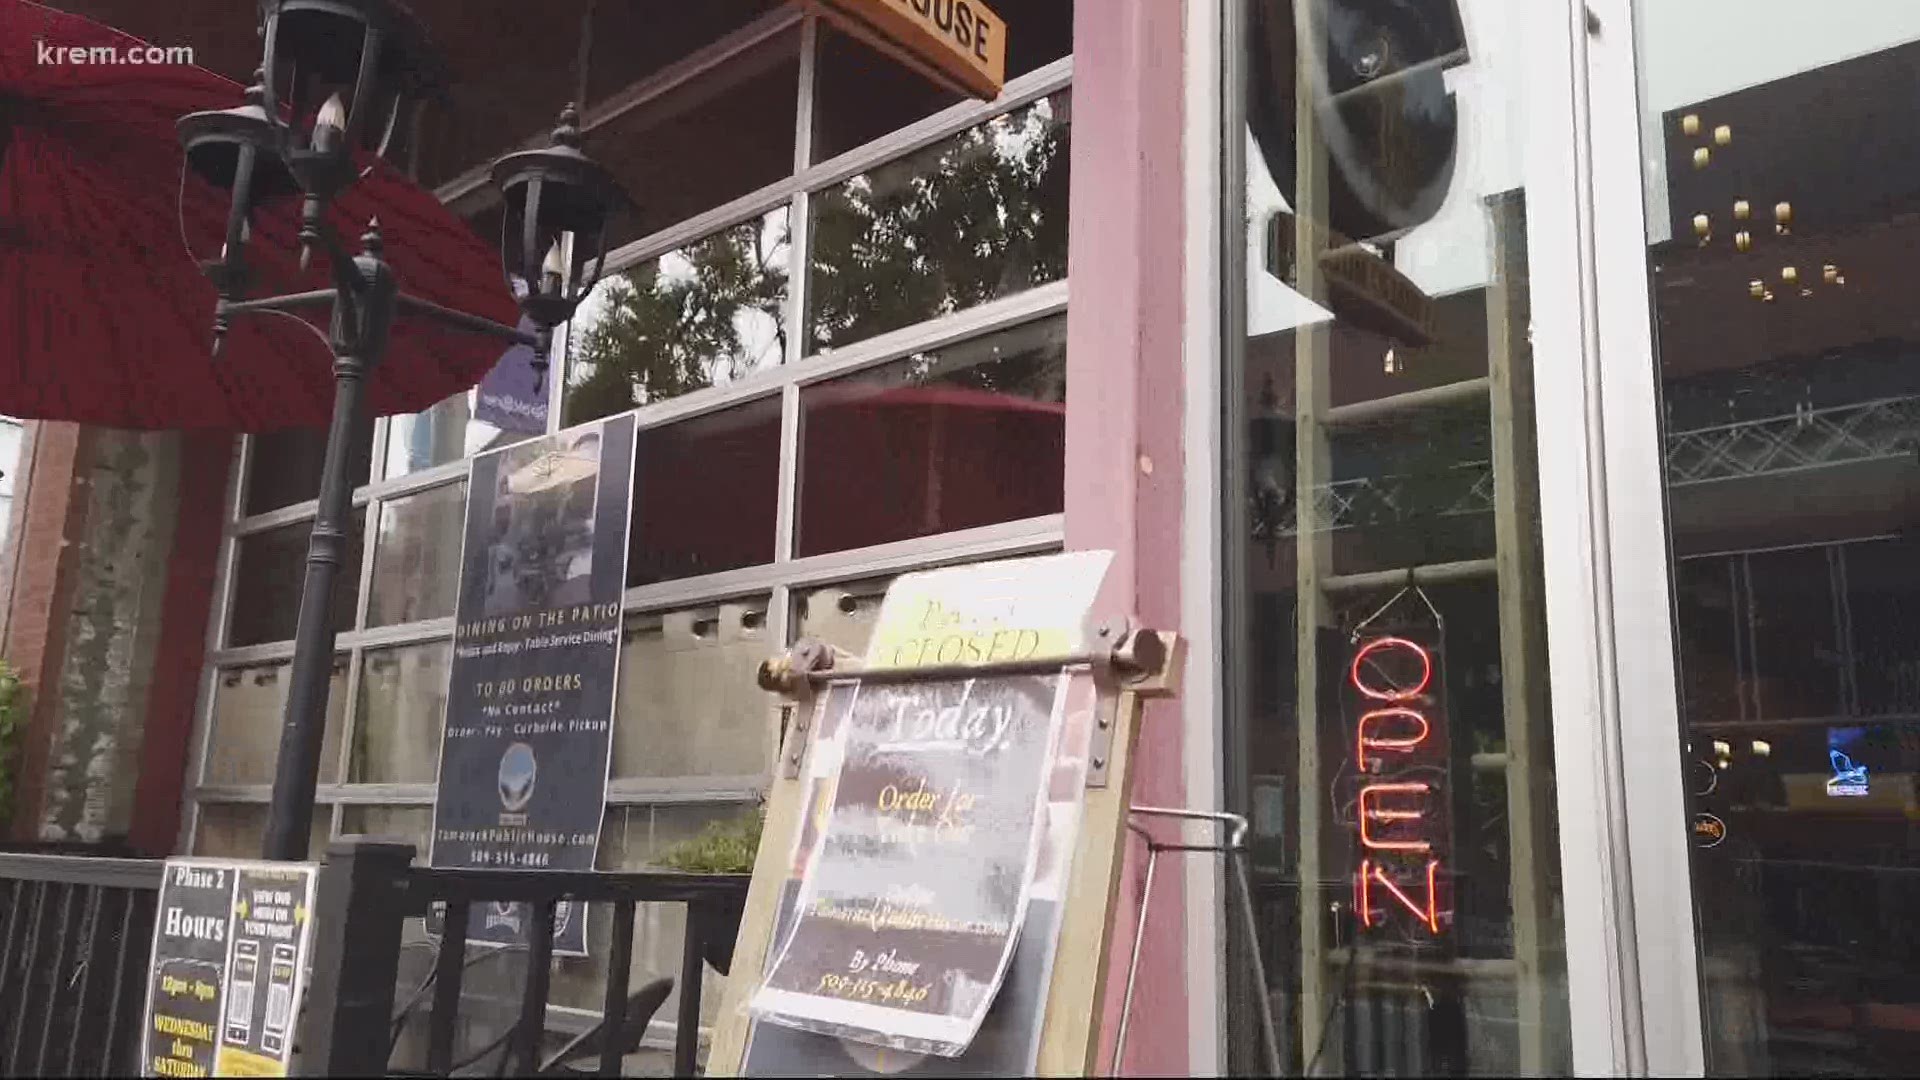 Spokane restaurants have turned to outdoor dining due to the coronavirus pandemic, but hazardous air quality caused by wildfire smoke has been another setback.